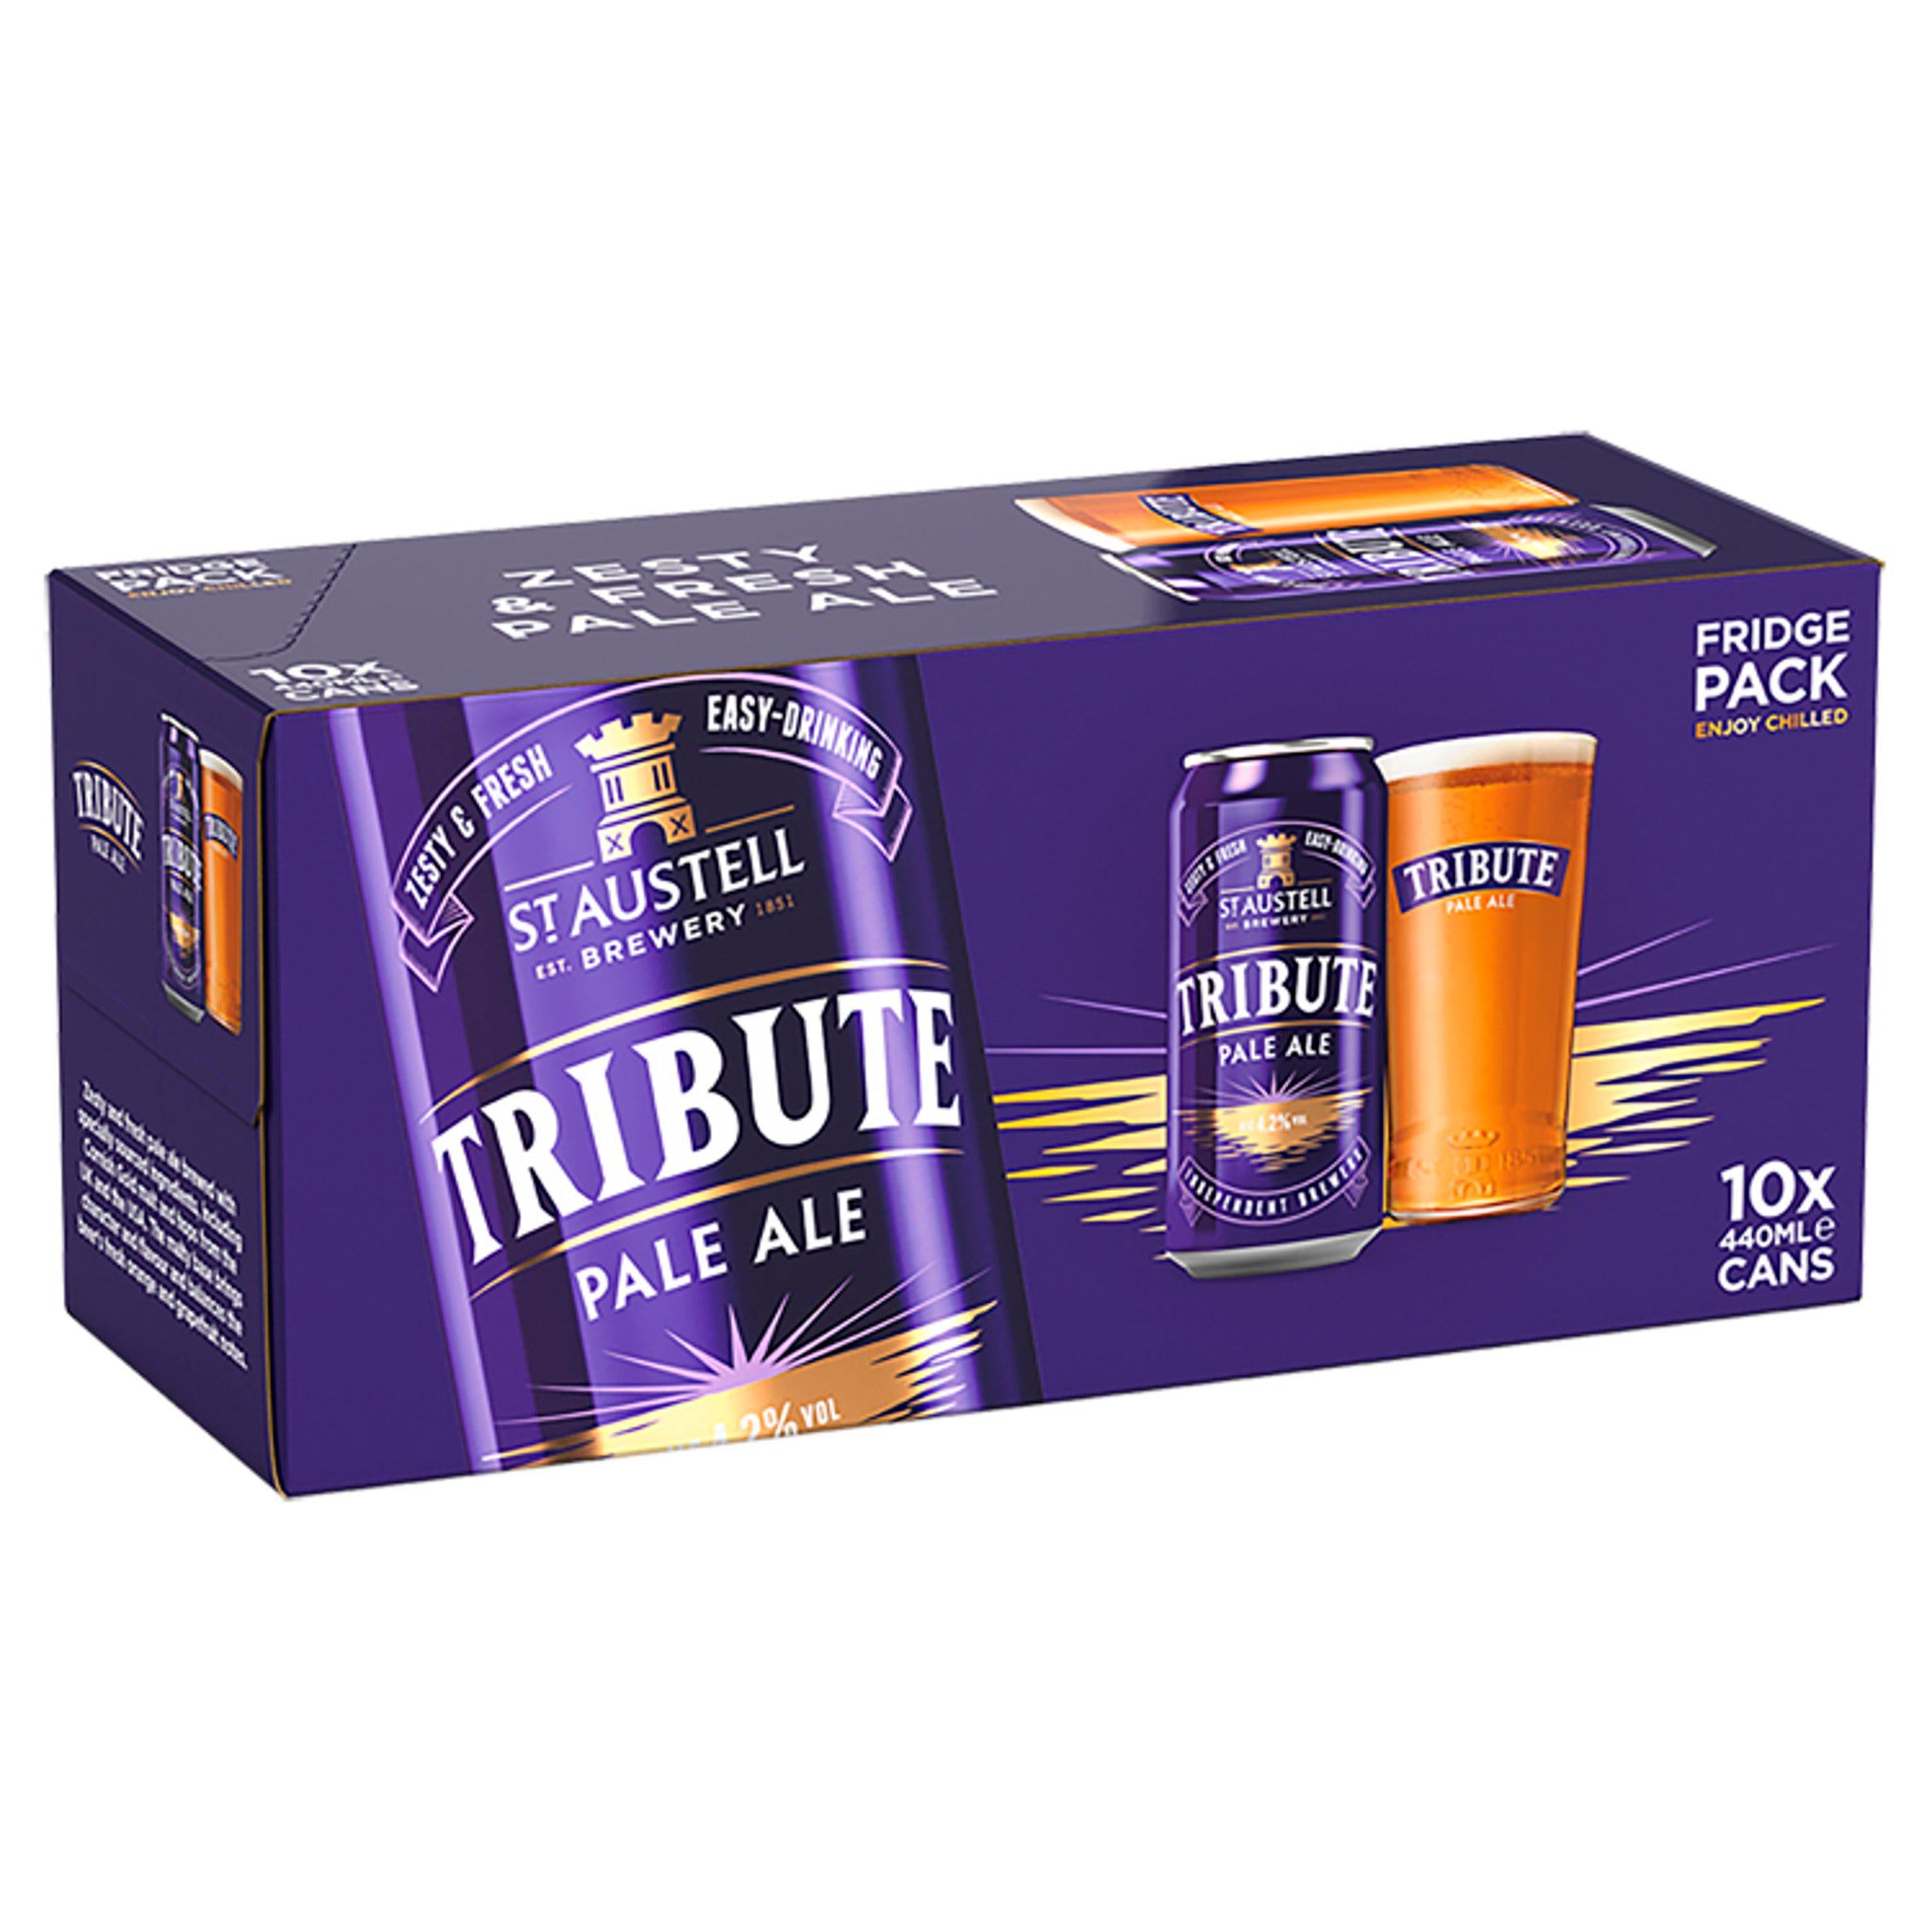 St Austell Brewery Tribute Pale Ale 10x440ml GOODS Sainsburys   